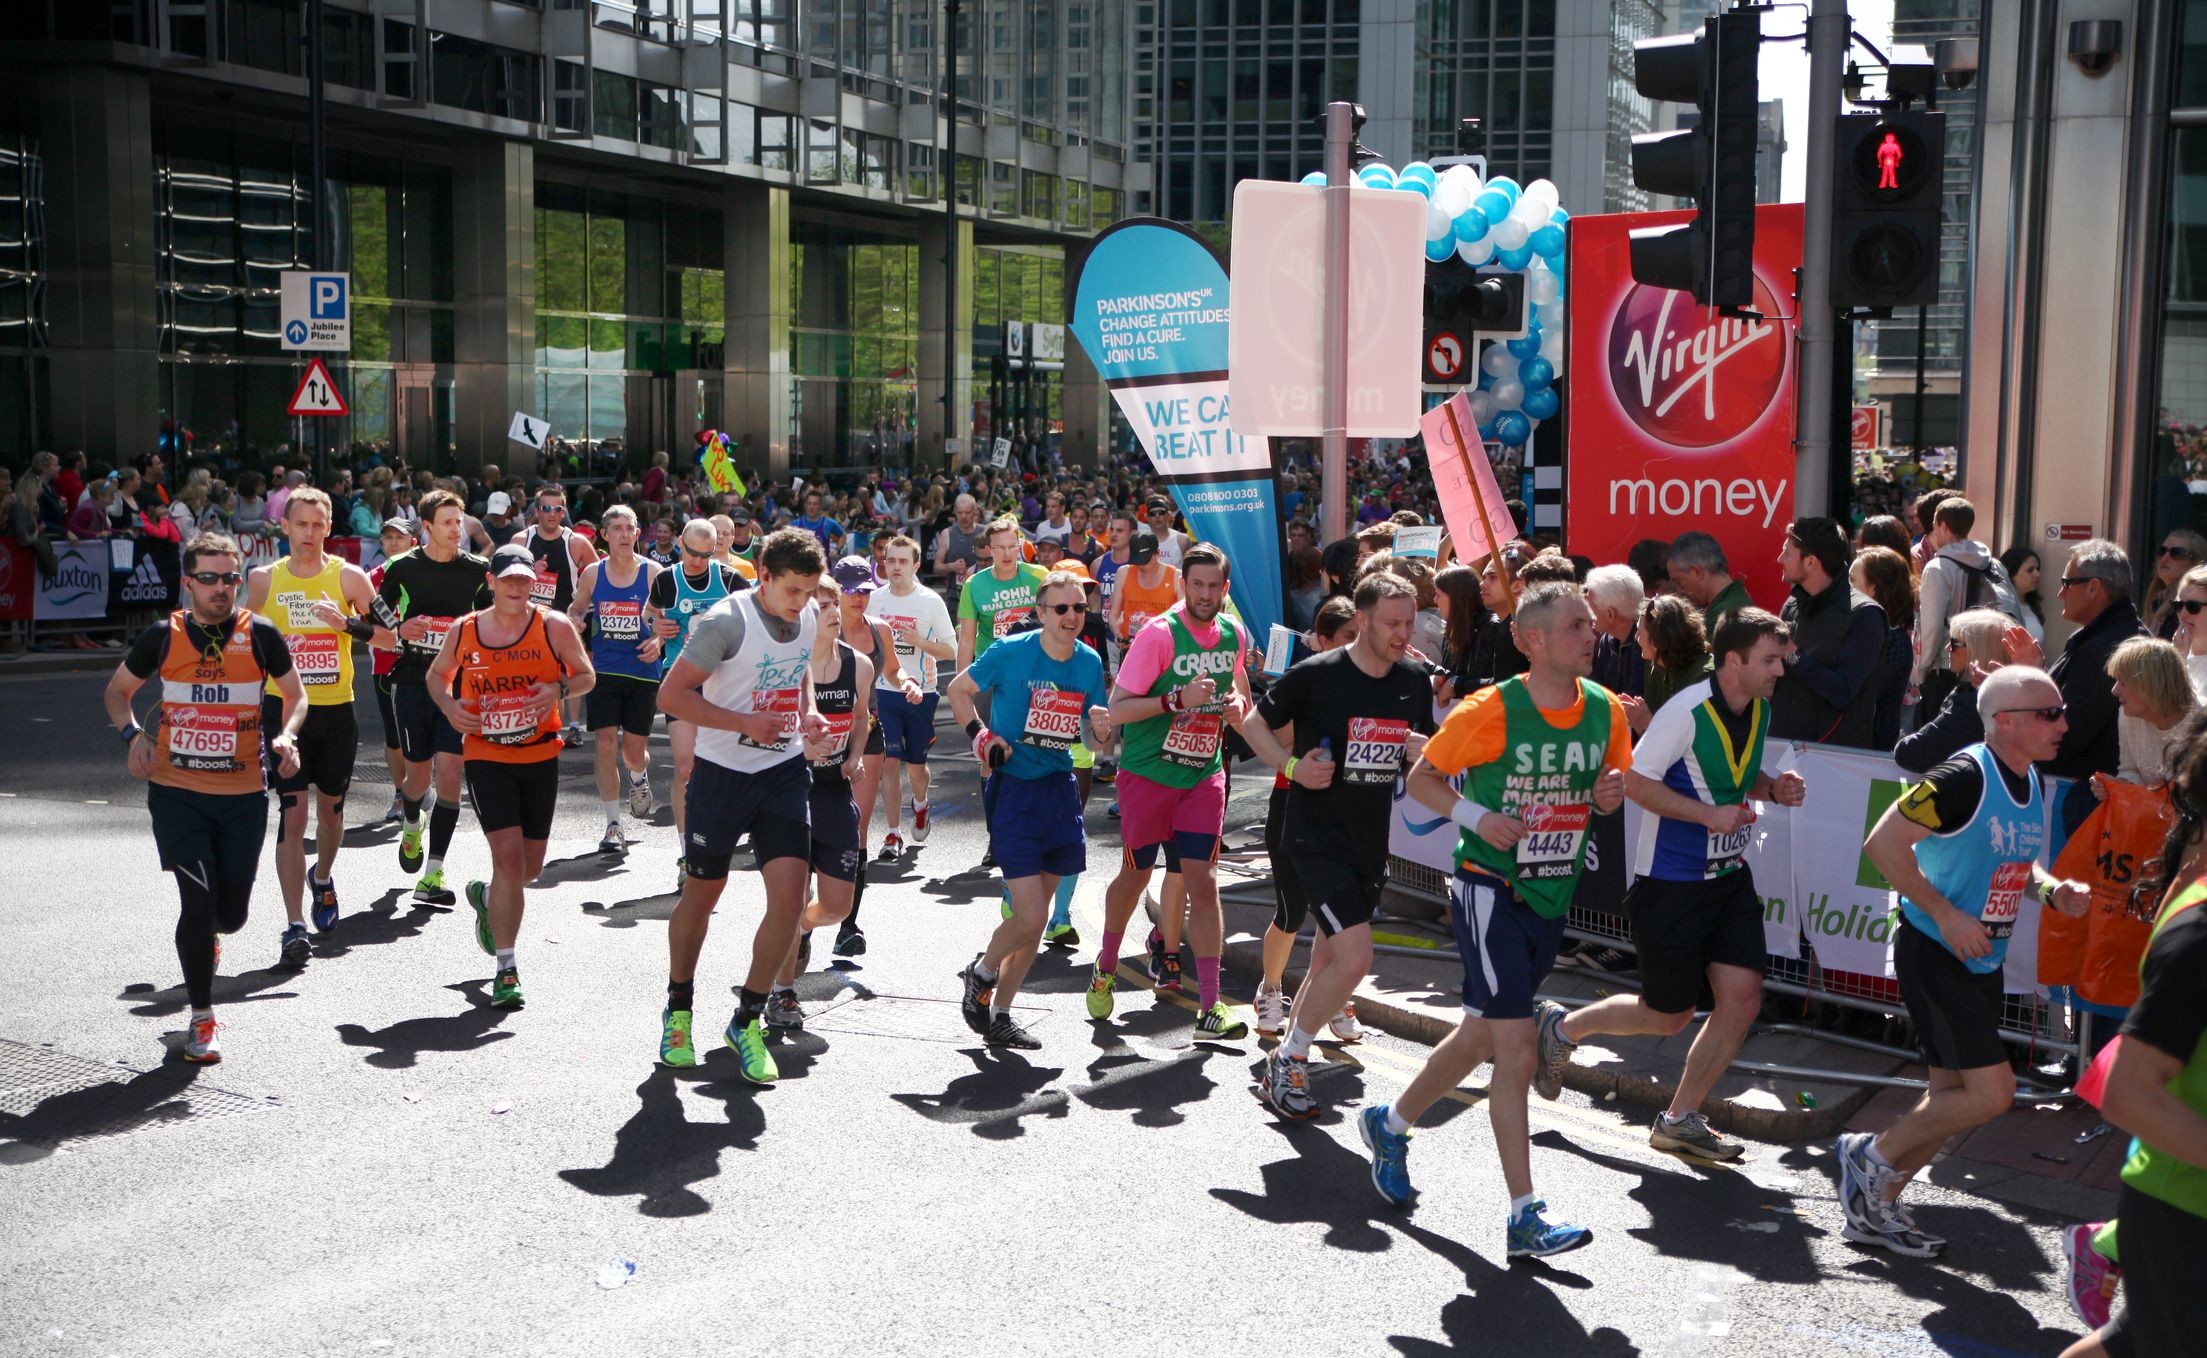 The total amount raised through the London Marathon will top 1 billion pounds this year ($1,319,000US)